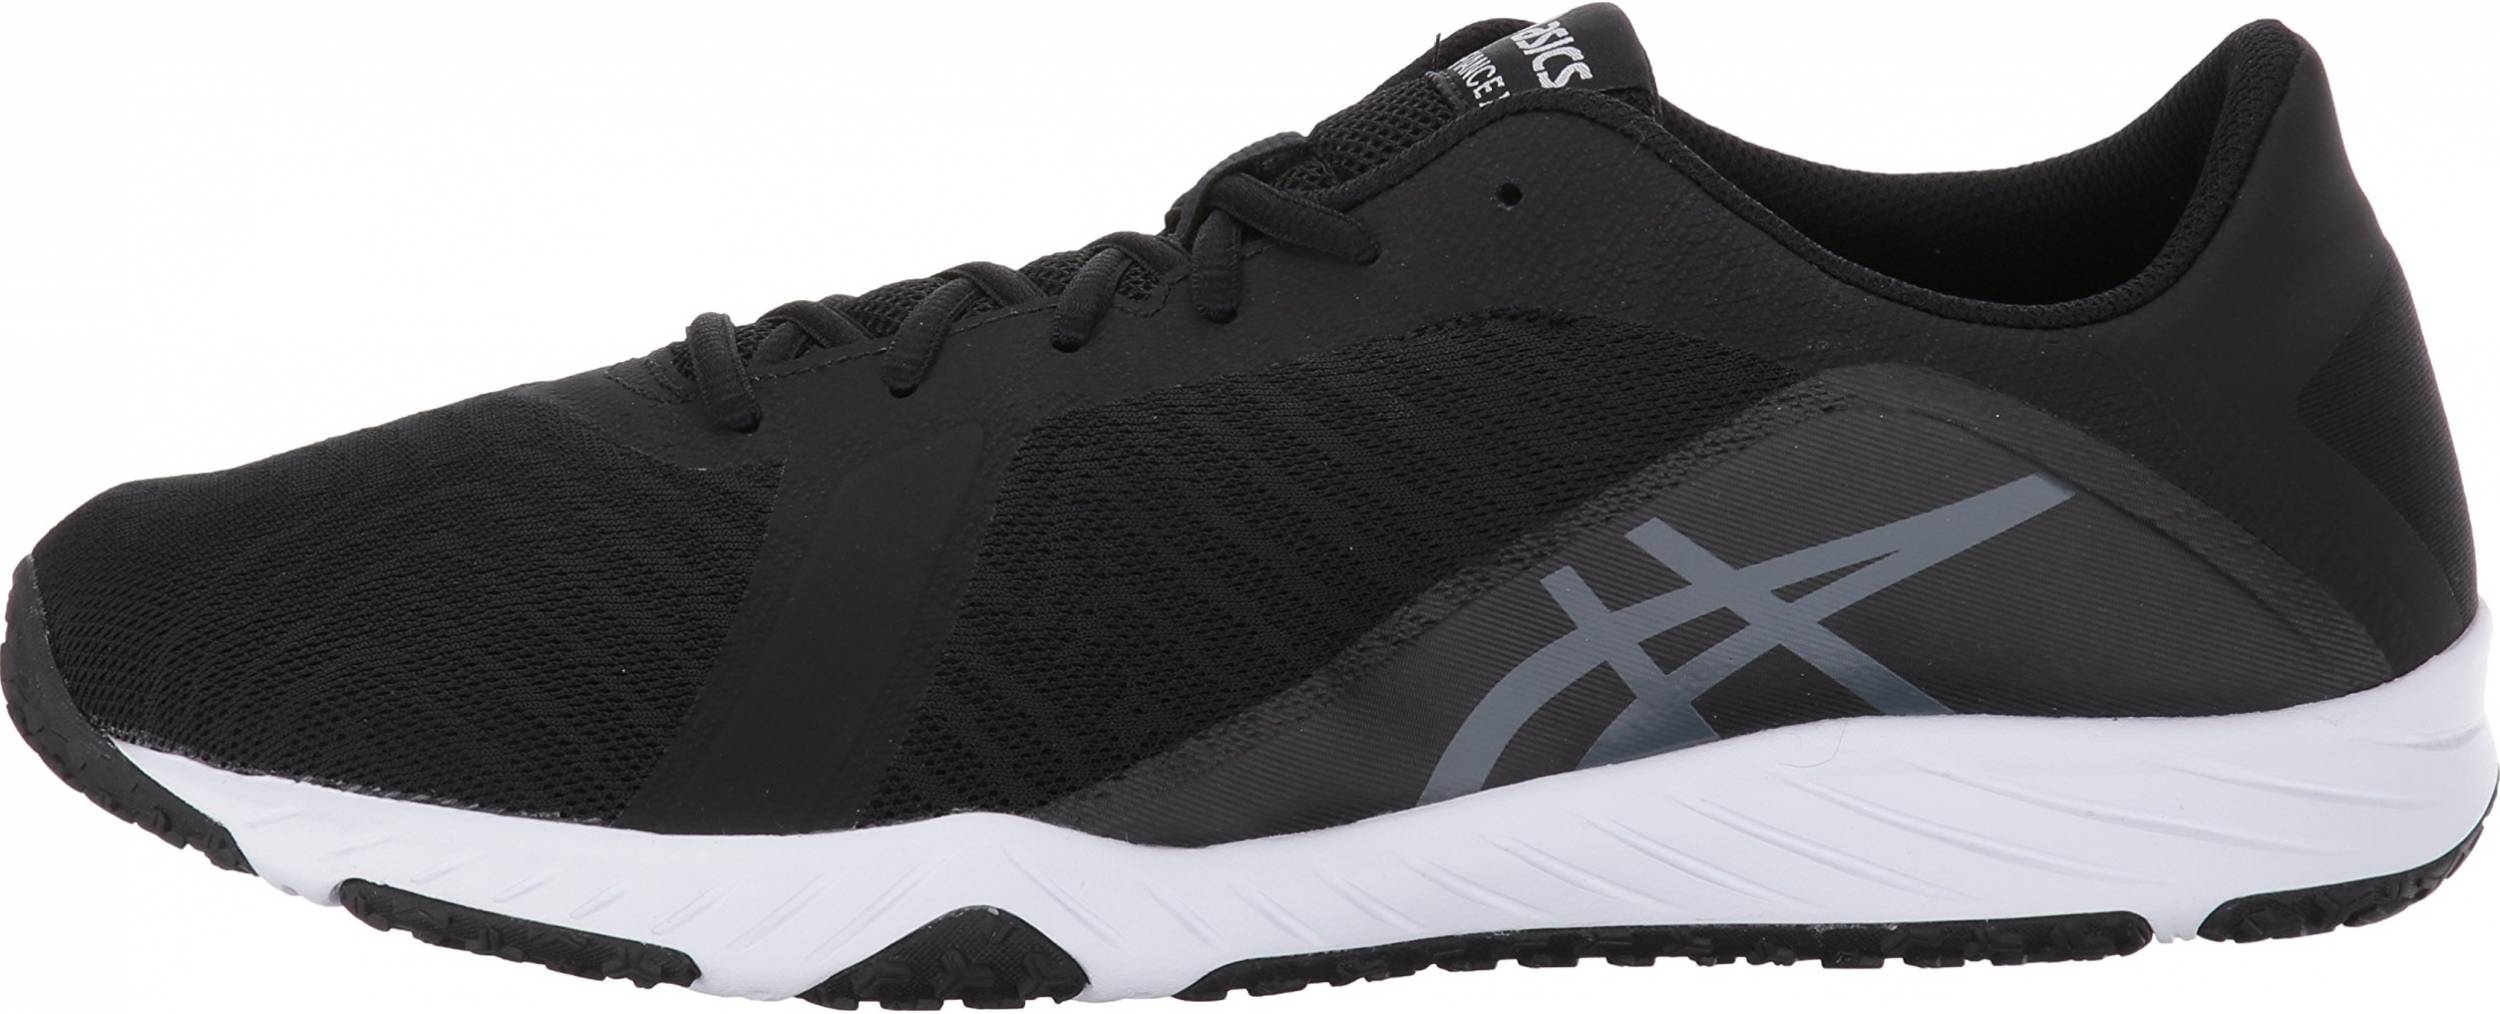 asics gym trainers